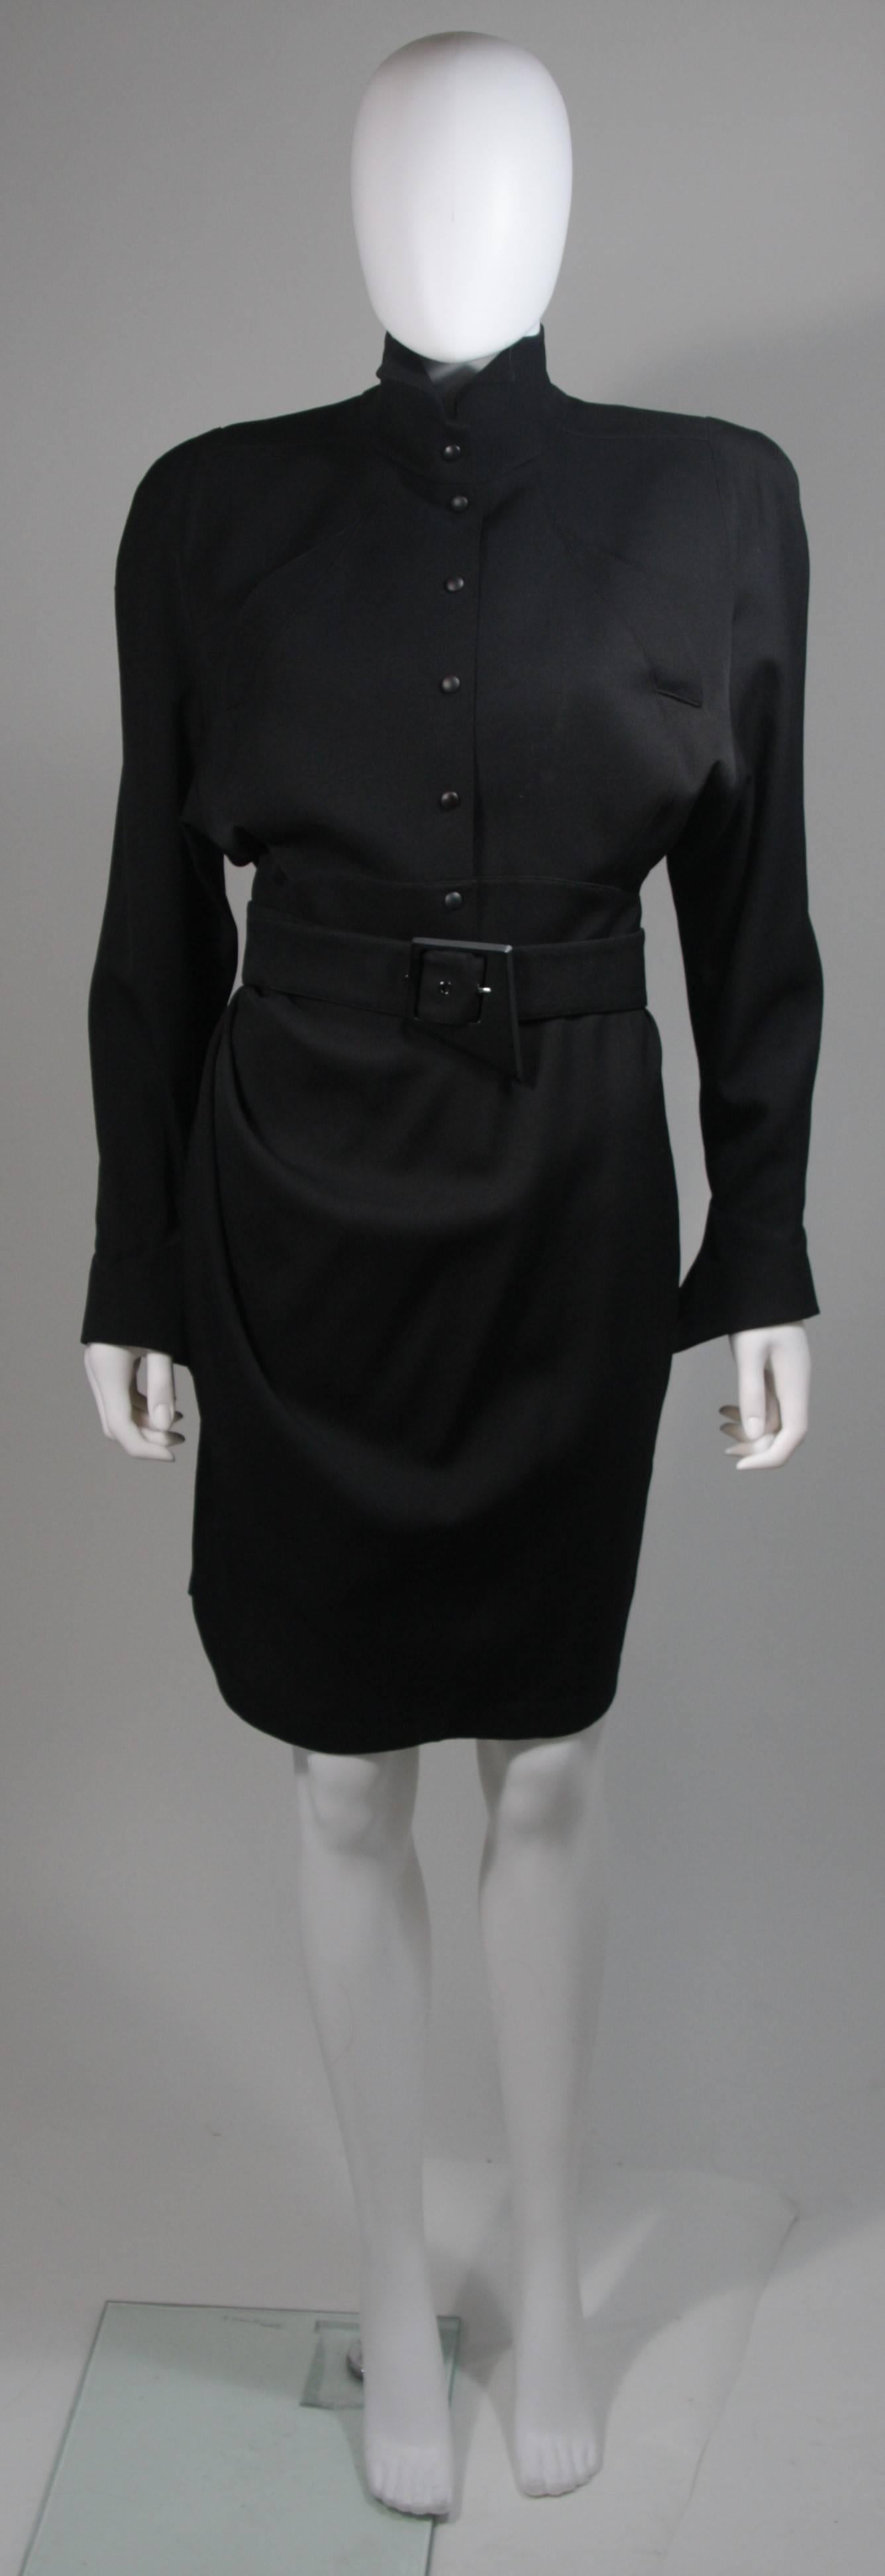  This dress is composed of a black fabric. The dress features a wrap style with belt and center front closures. In excellent vintage condition. Made in France. 

  **Please cross-reference measurements for personal accuracy. Size in description